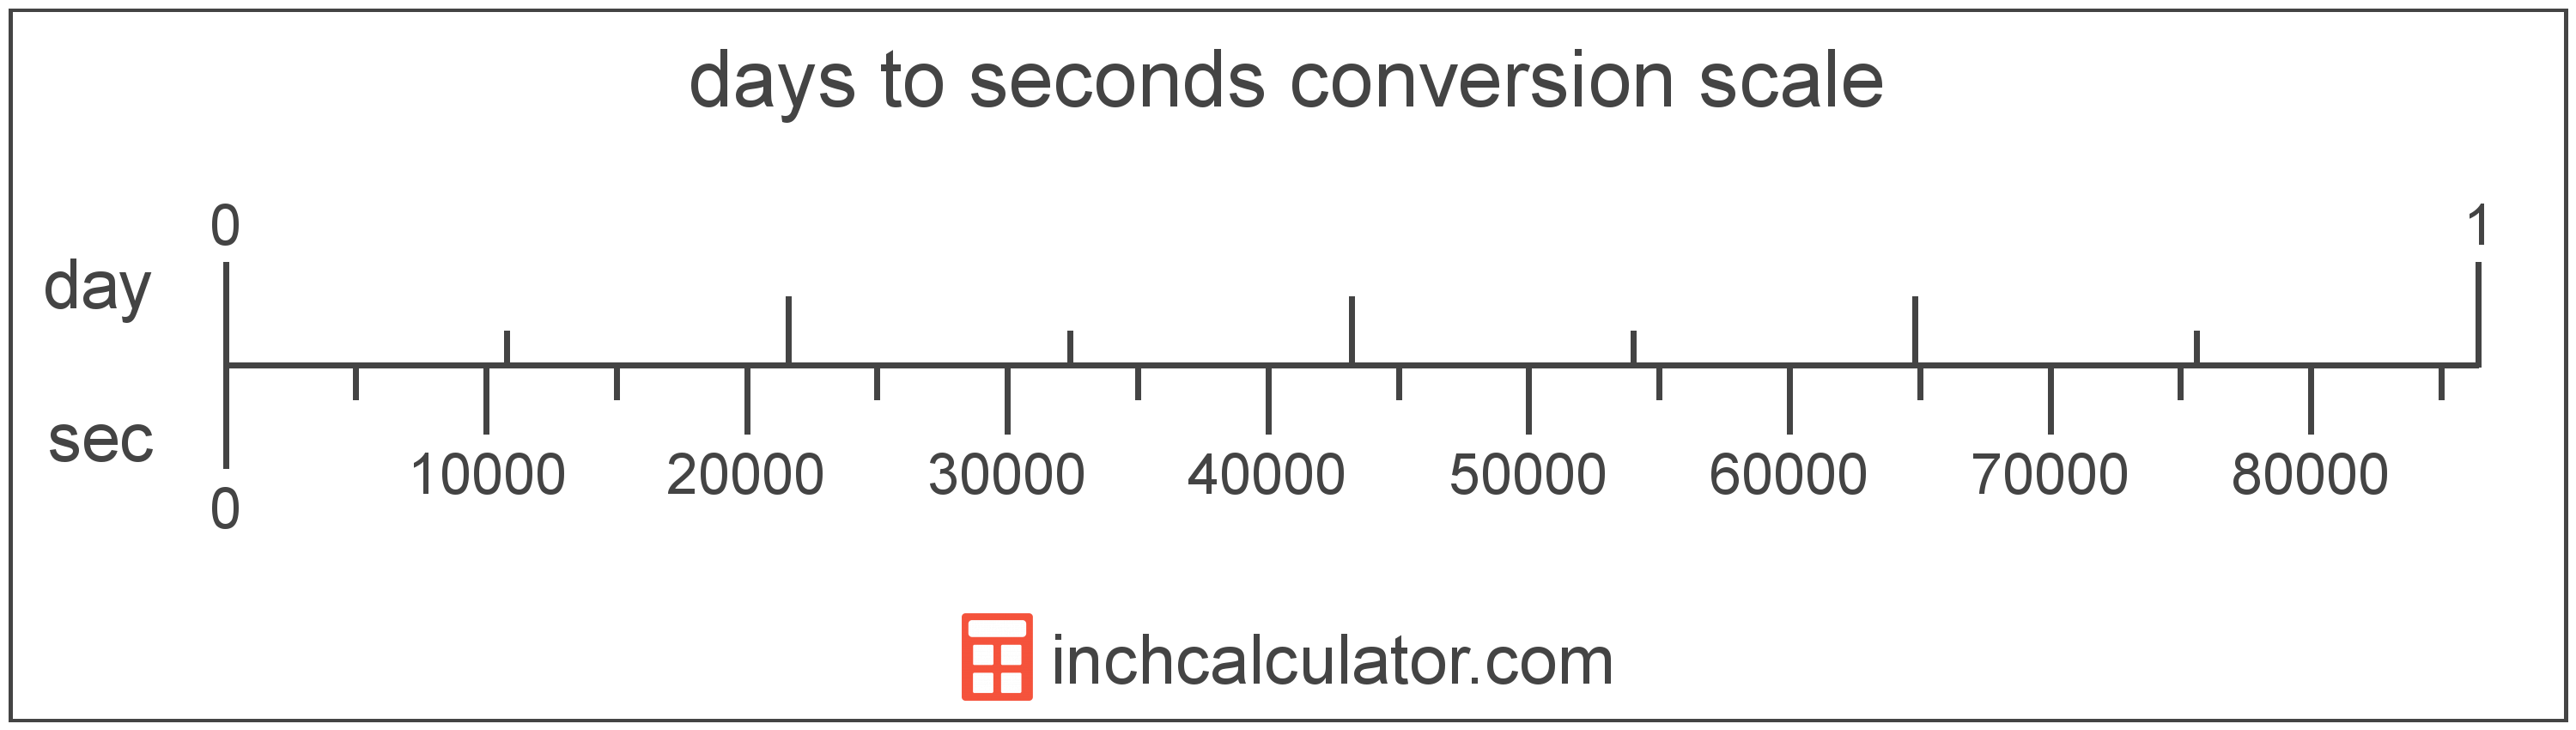 conversion scale showing days and equivalent seconds time values